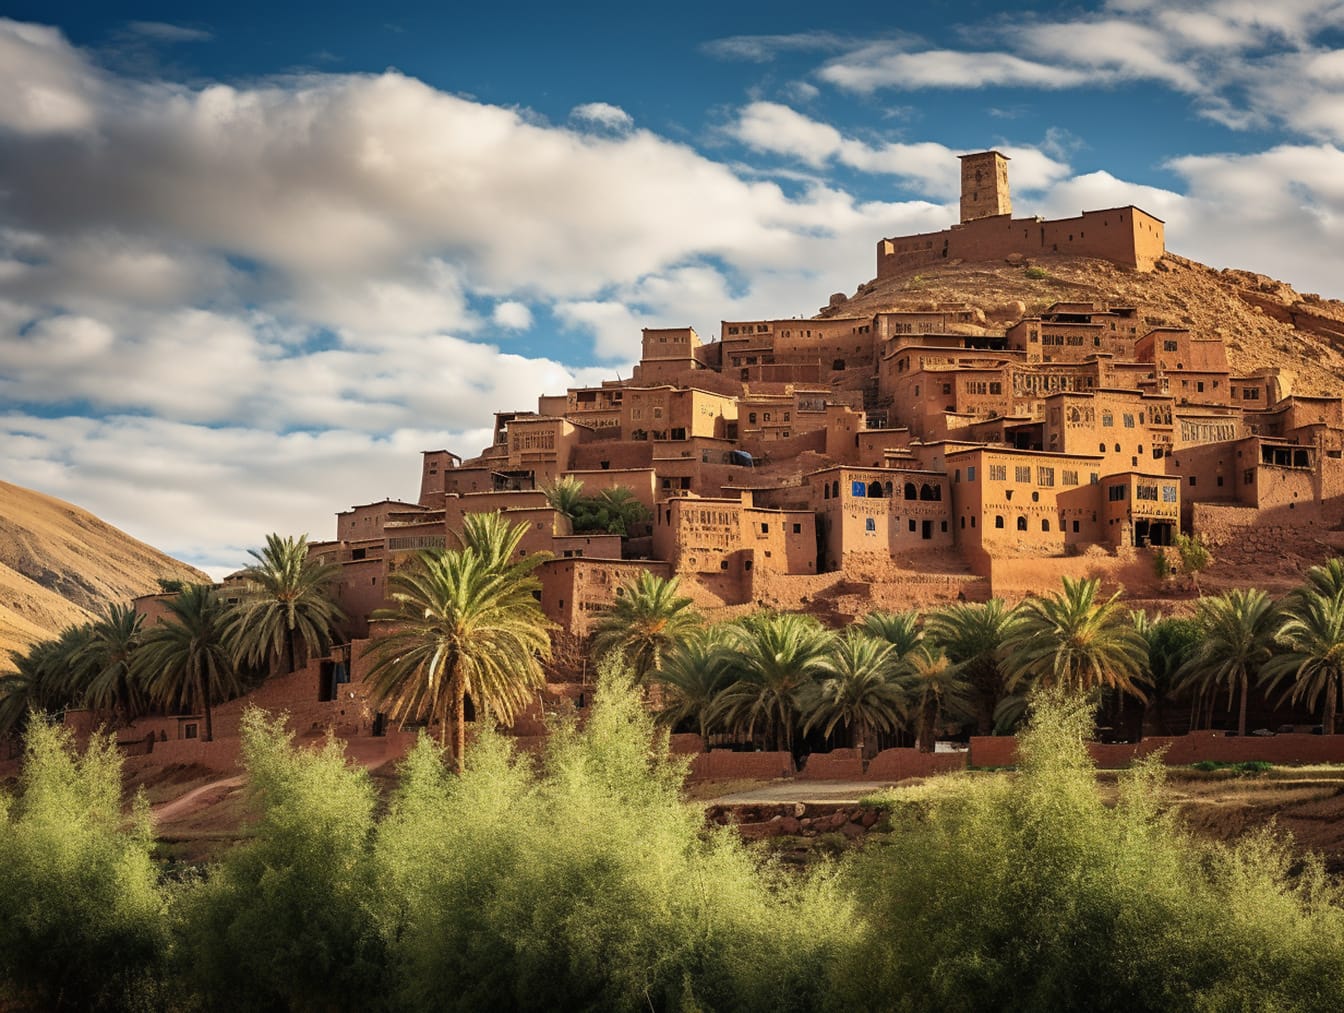 Historic medieval houses in village on a hilltop in Morocco